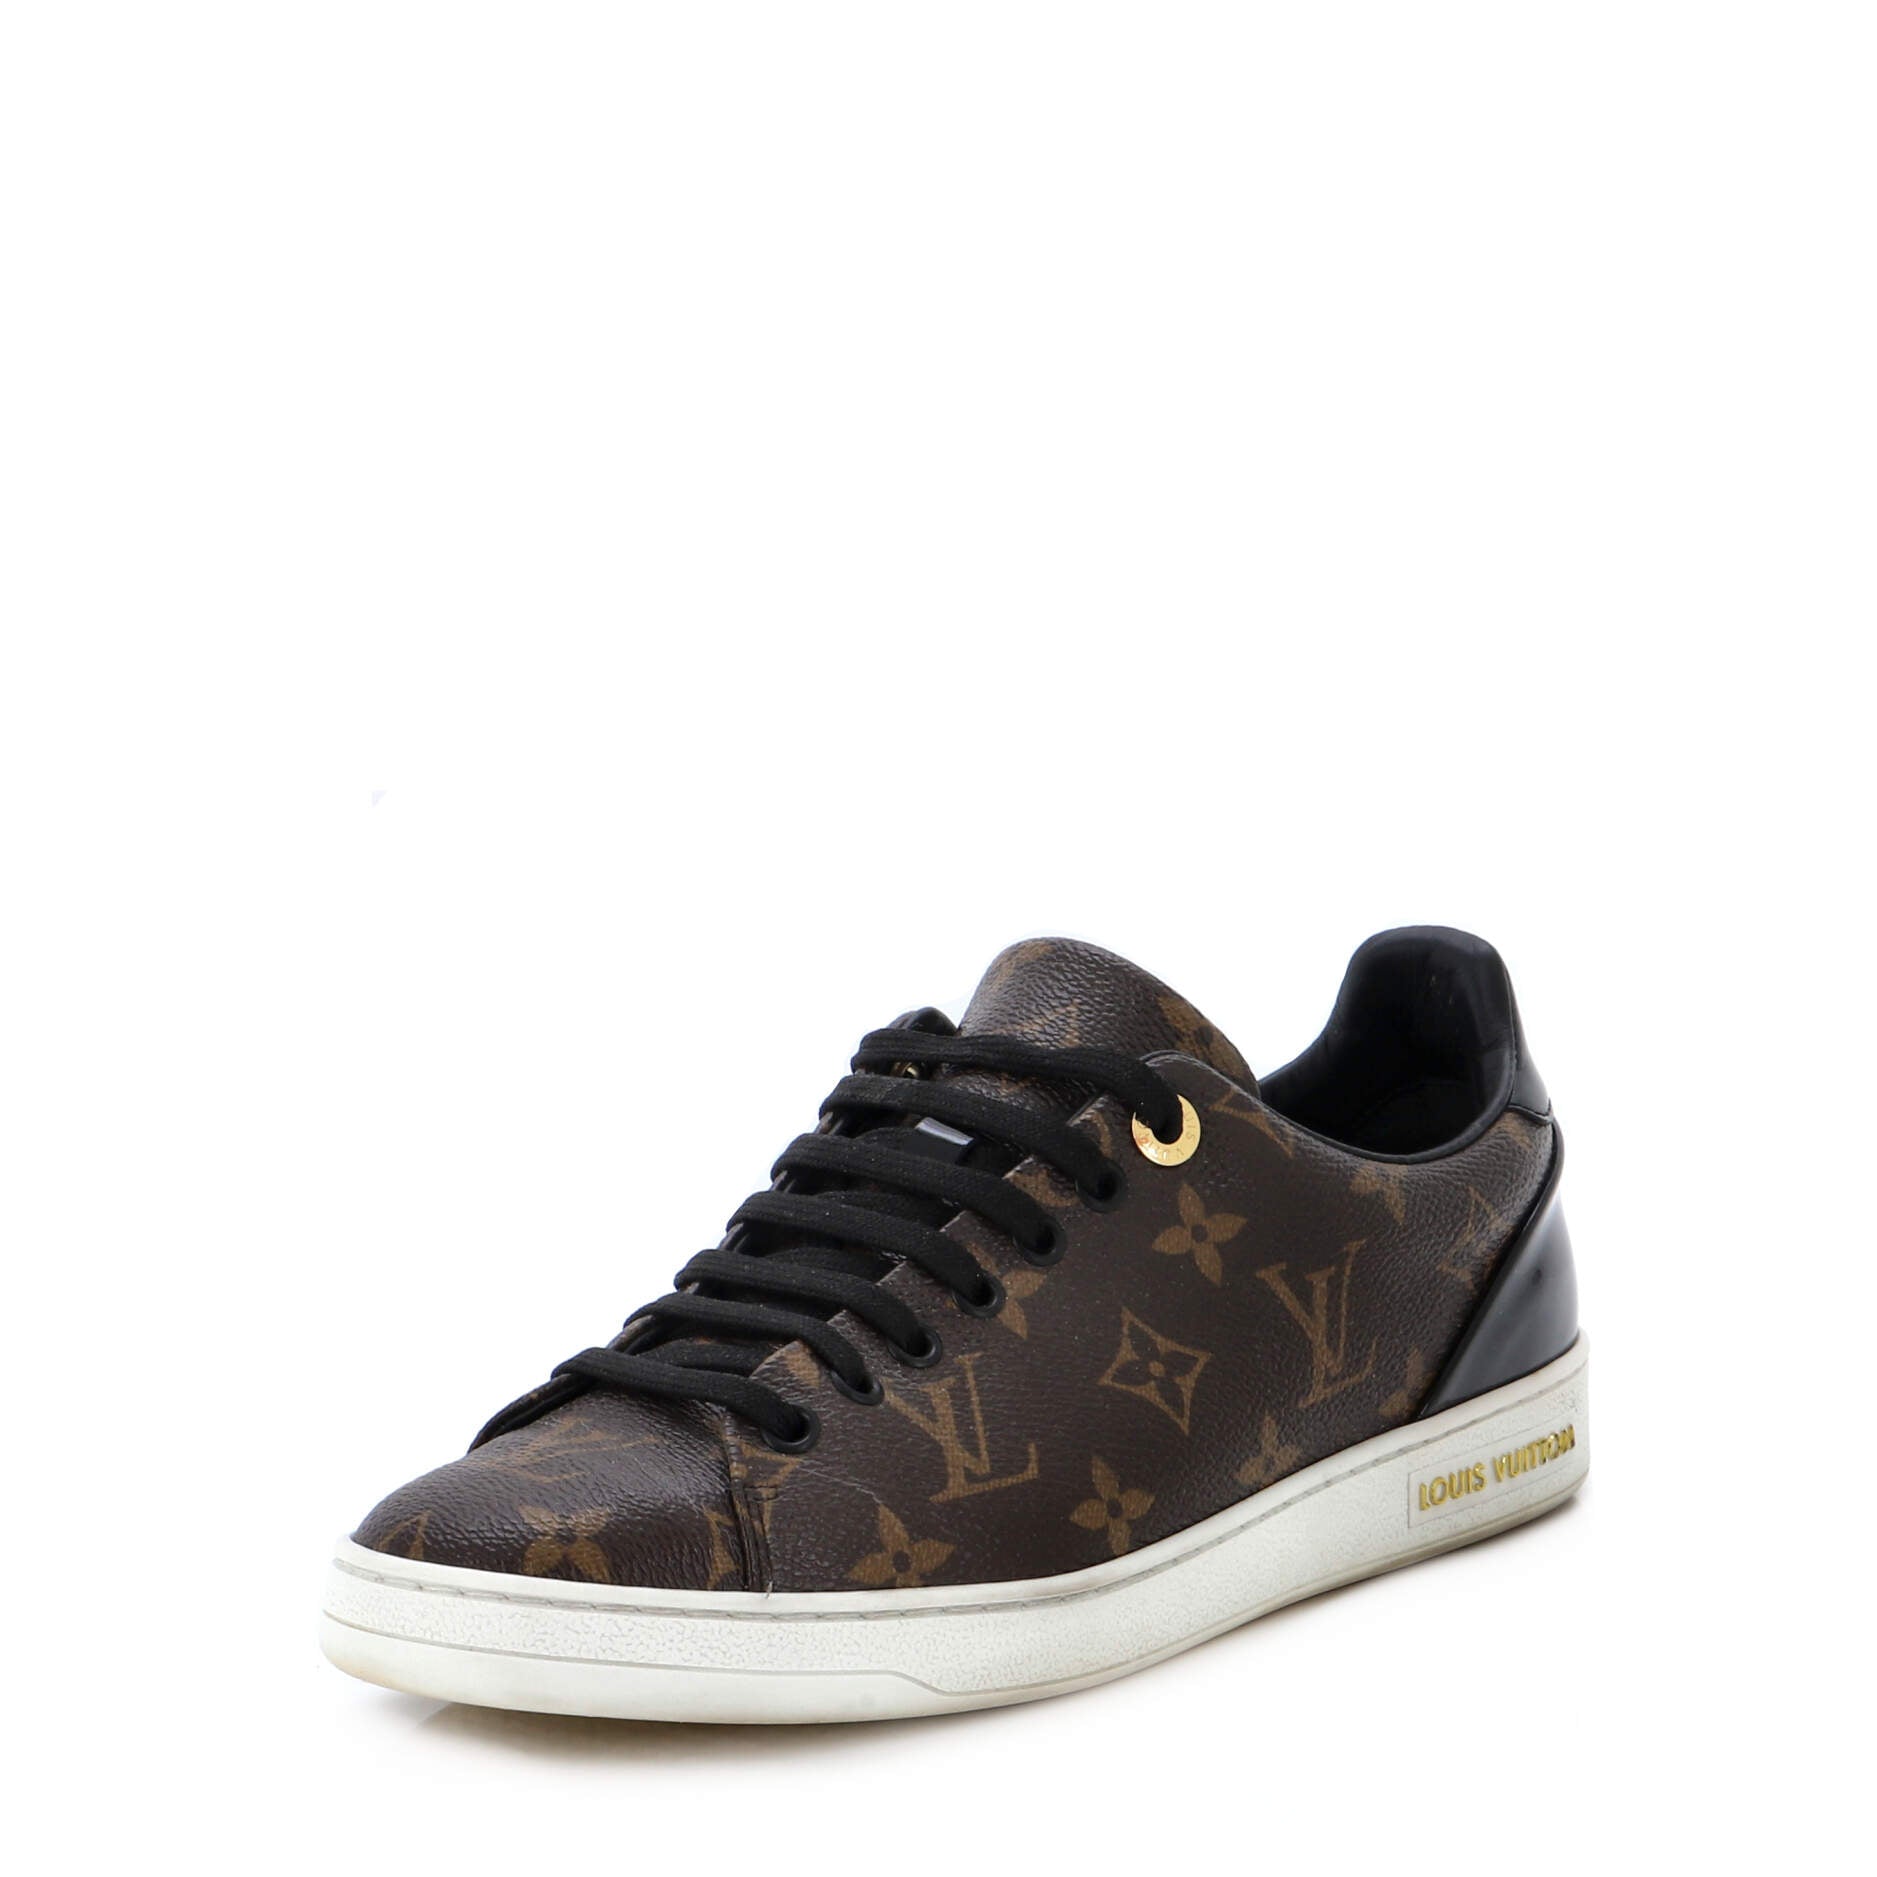 Louis Vuitton Women's Time Out Sneakers Monogram Canvas Brown 2351561